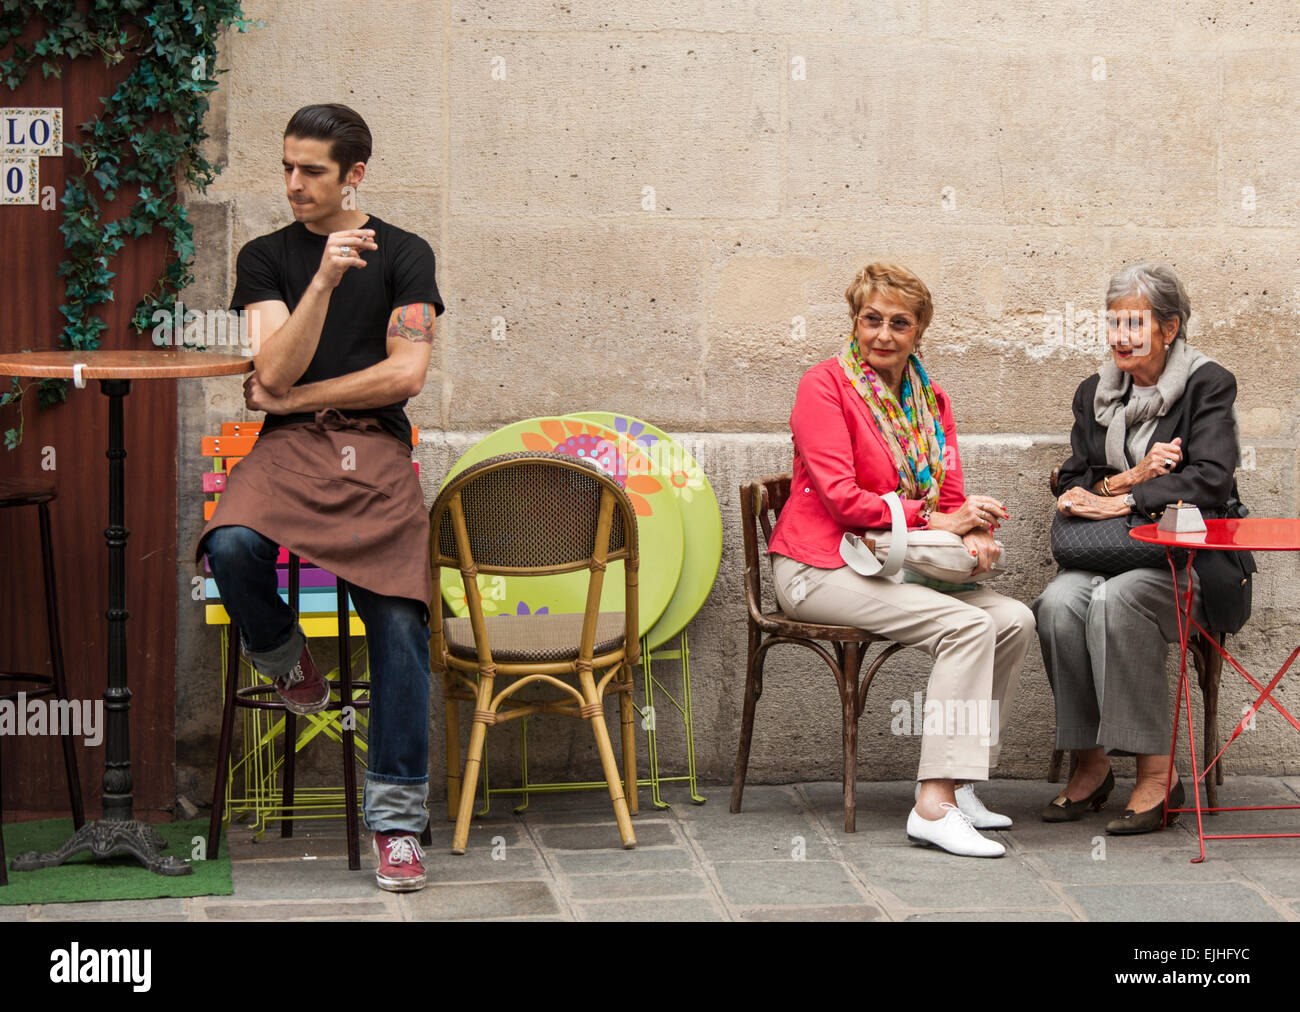 Waiter and two women smoking outside cafe in Paris, France Stock Photo